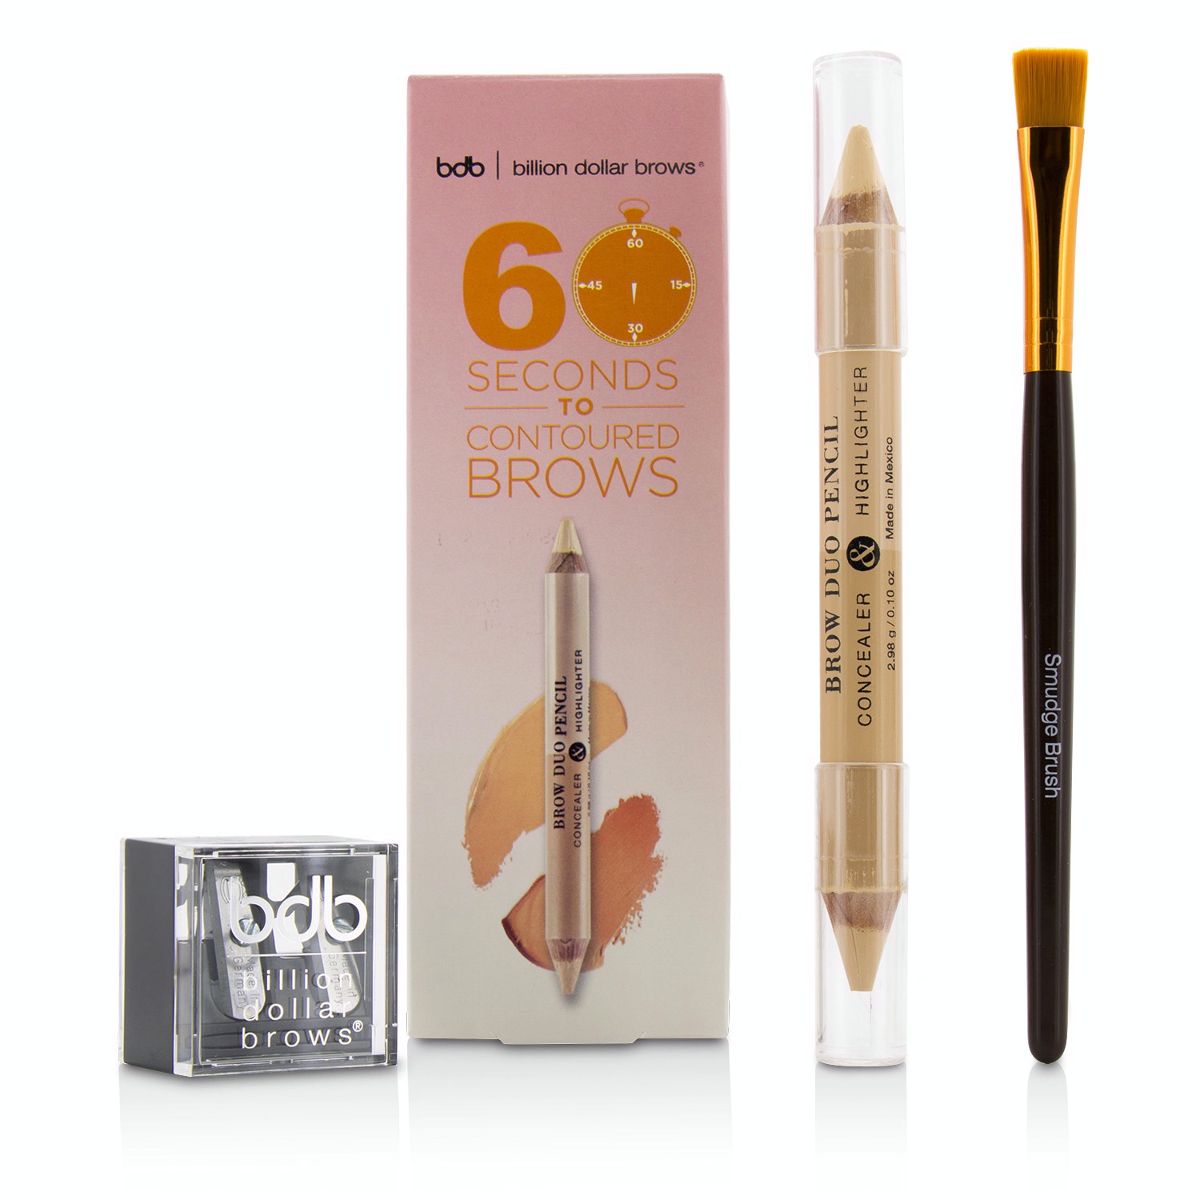 60 Seconds to Contoured Brows Kit (1x Brow Duo Pencil 1x Smudge Brush 1x Duo Sharpener) Billion Dollar Brows Image